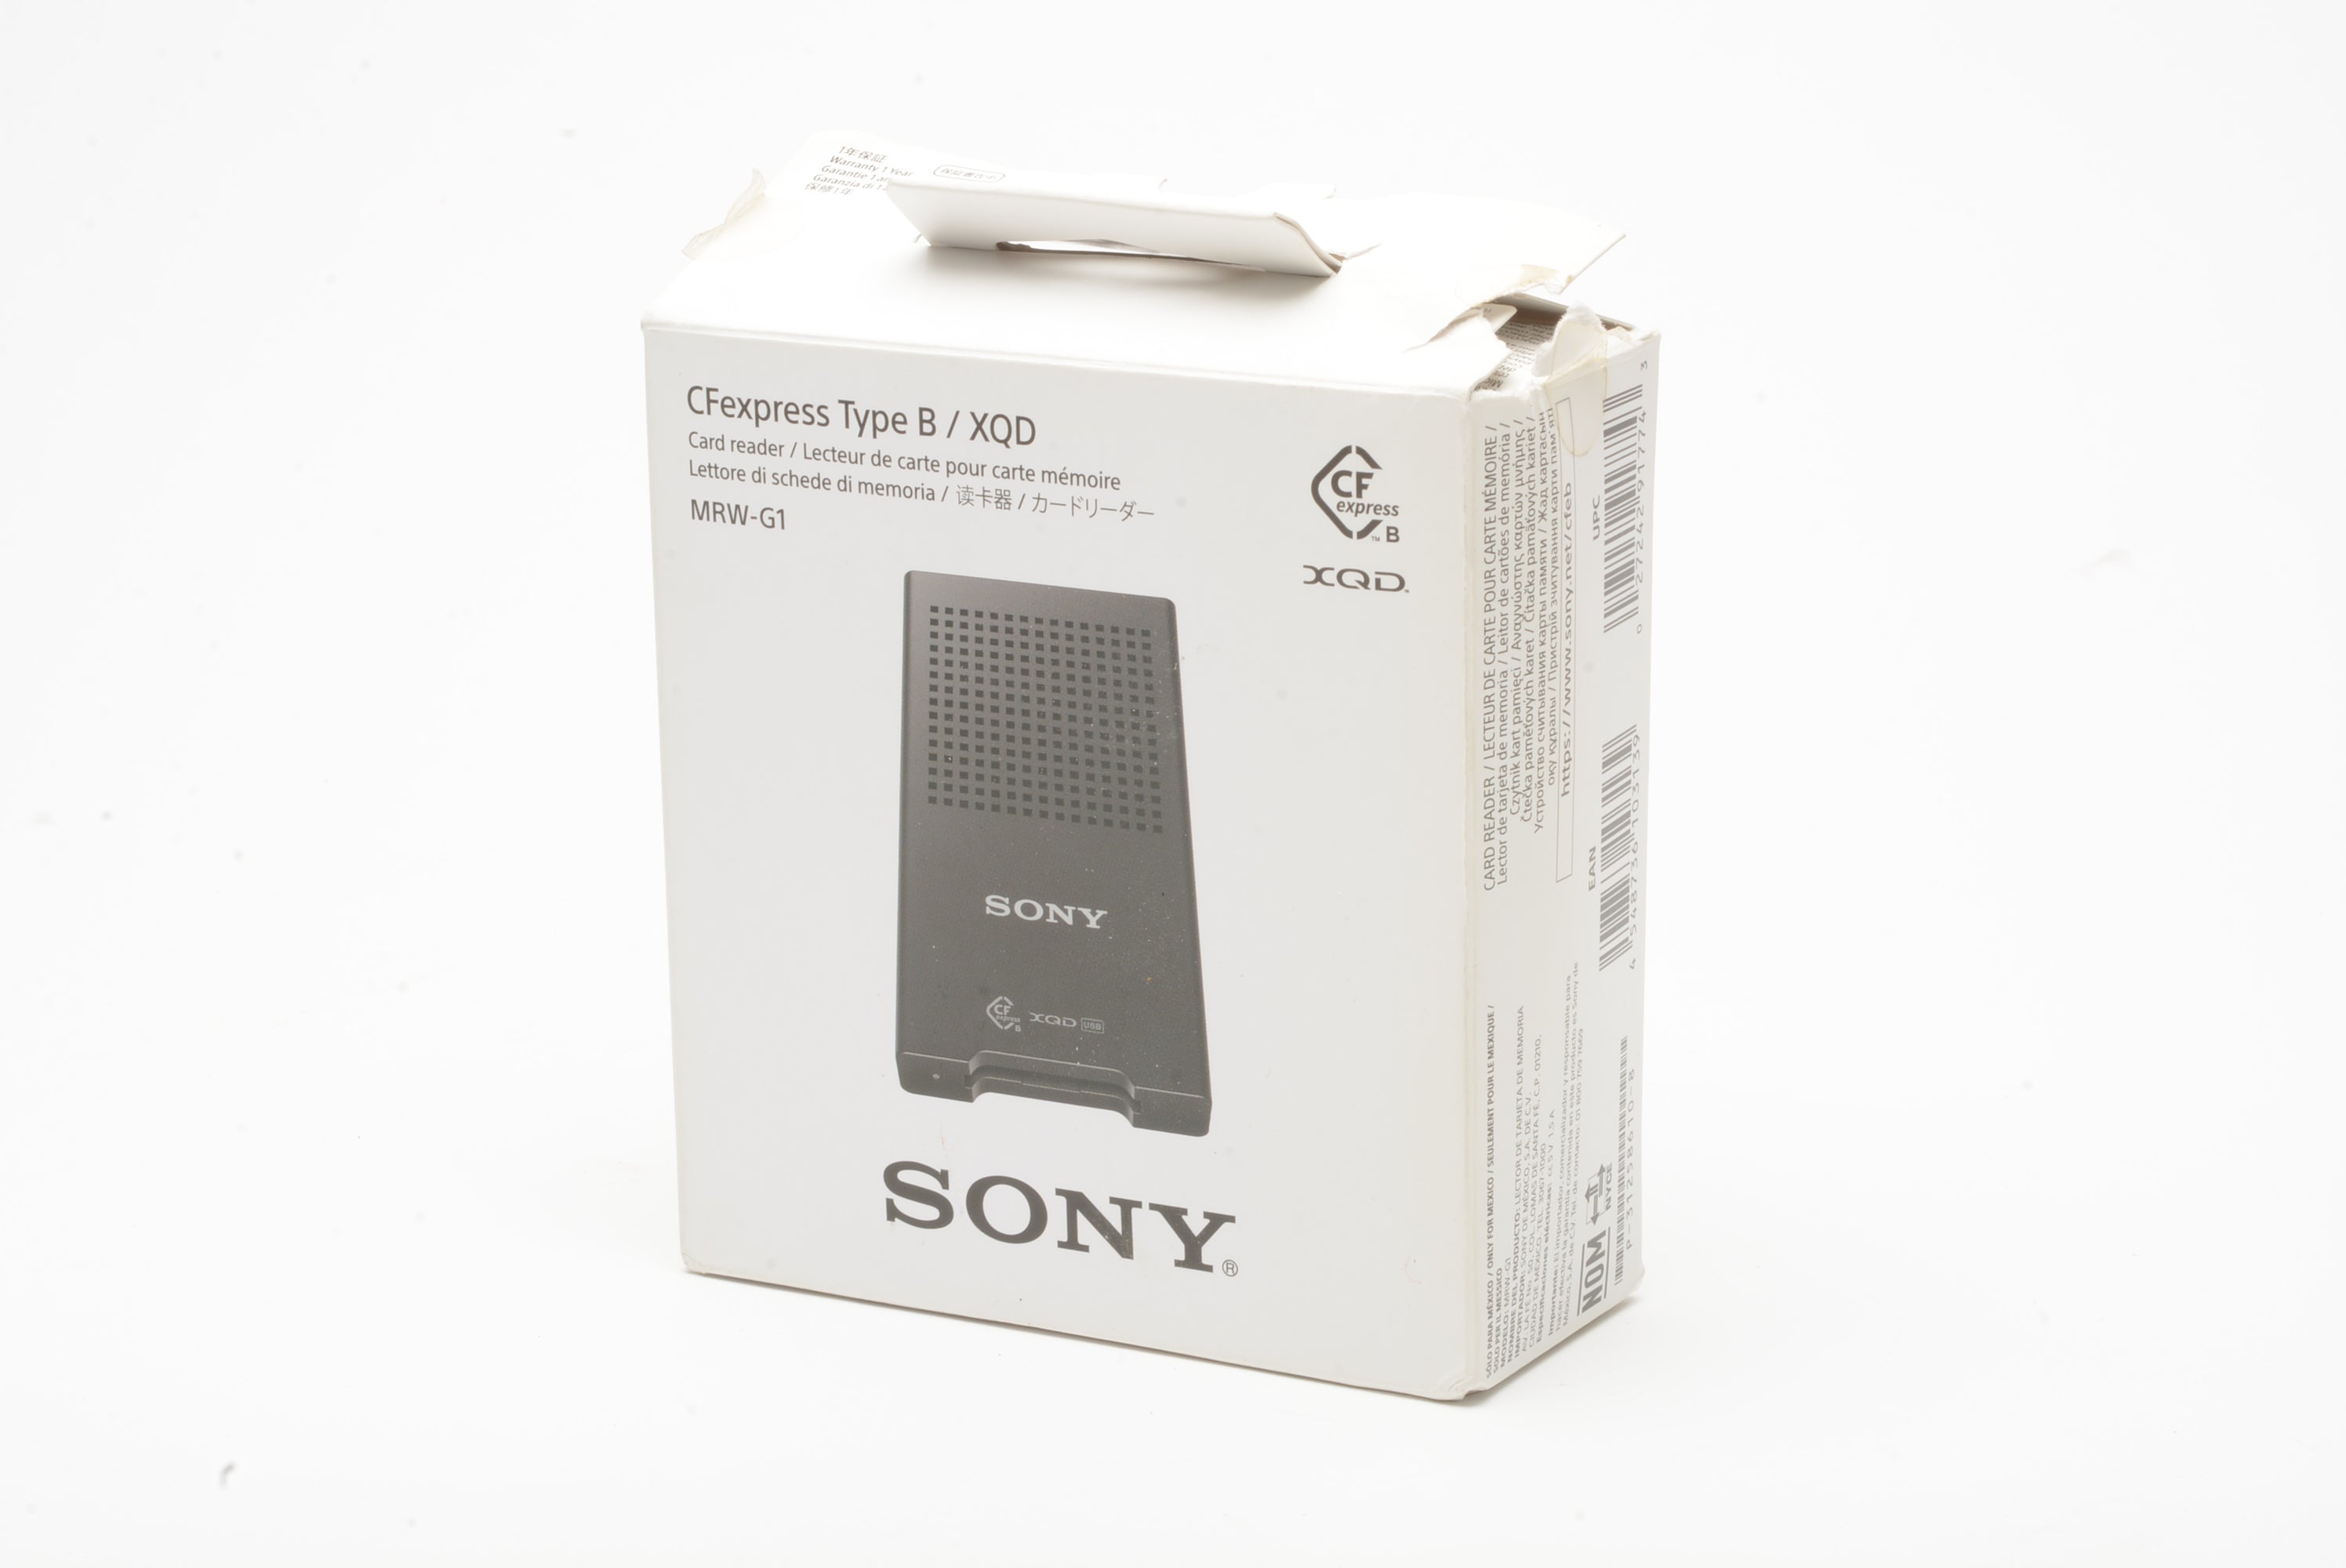 Sony MRW-G1 CF Express Type B / XQD memory card reader + cables 